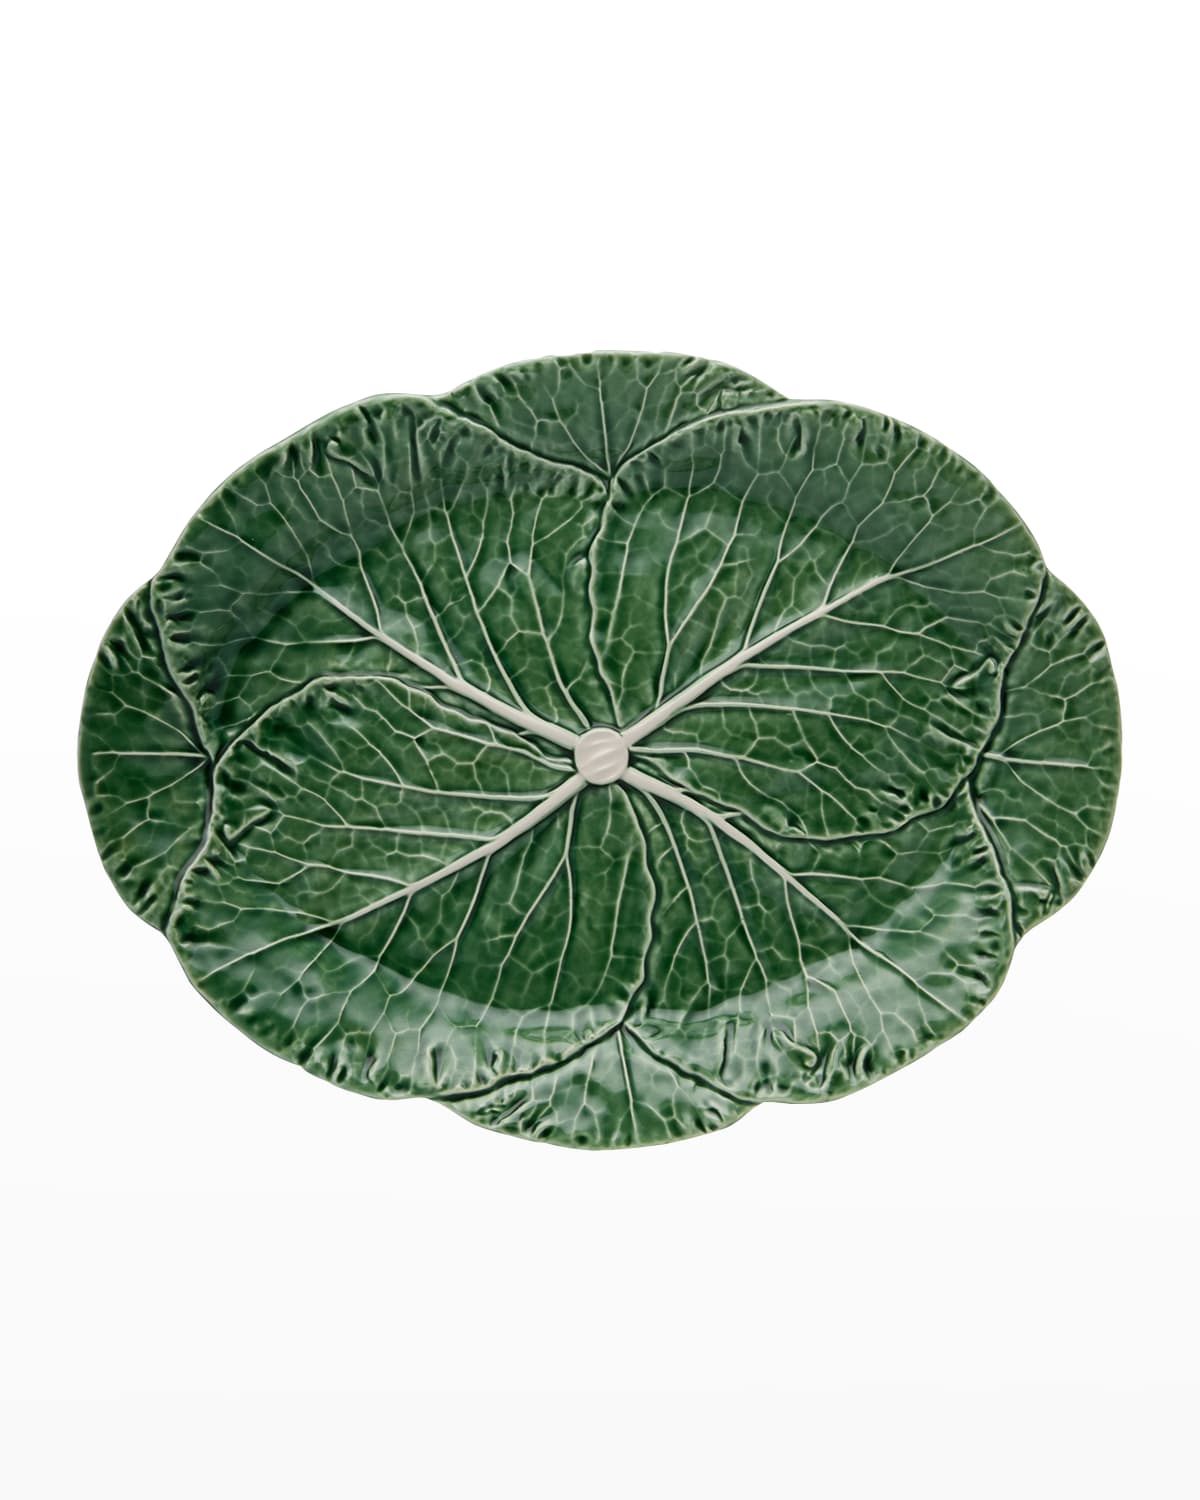 Cabbage 17" Oval Platter, Green